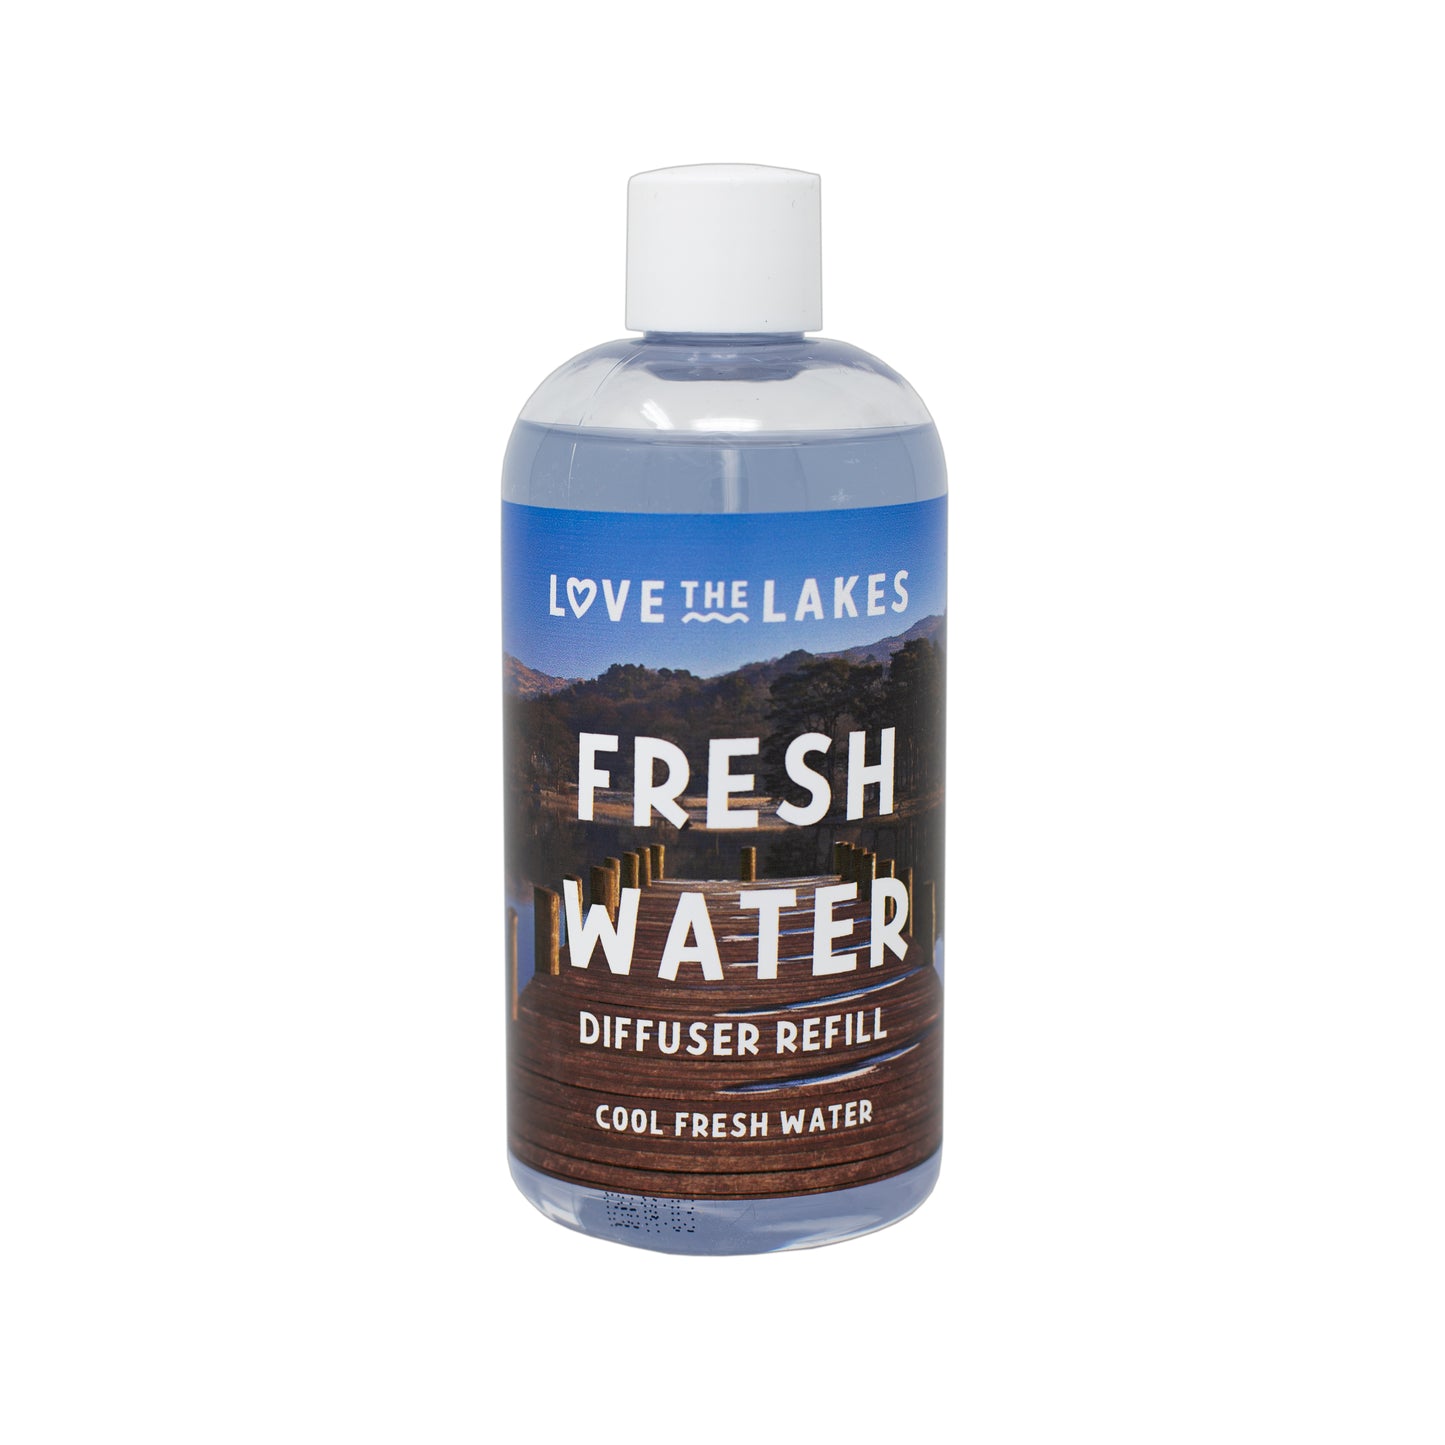 Love the Lakes Fresh Water 200ml Reed Diffuser Refill